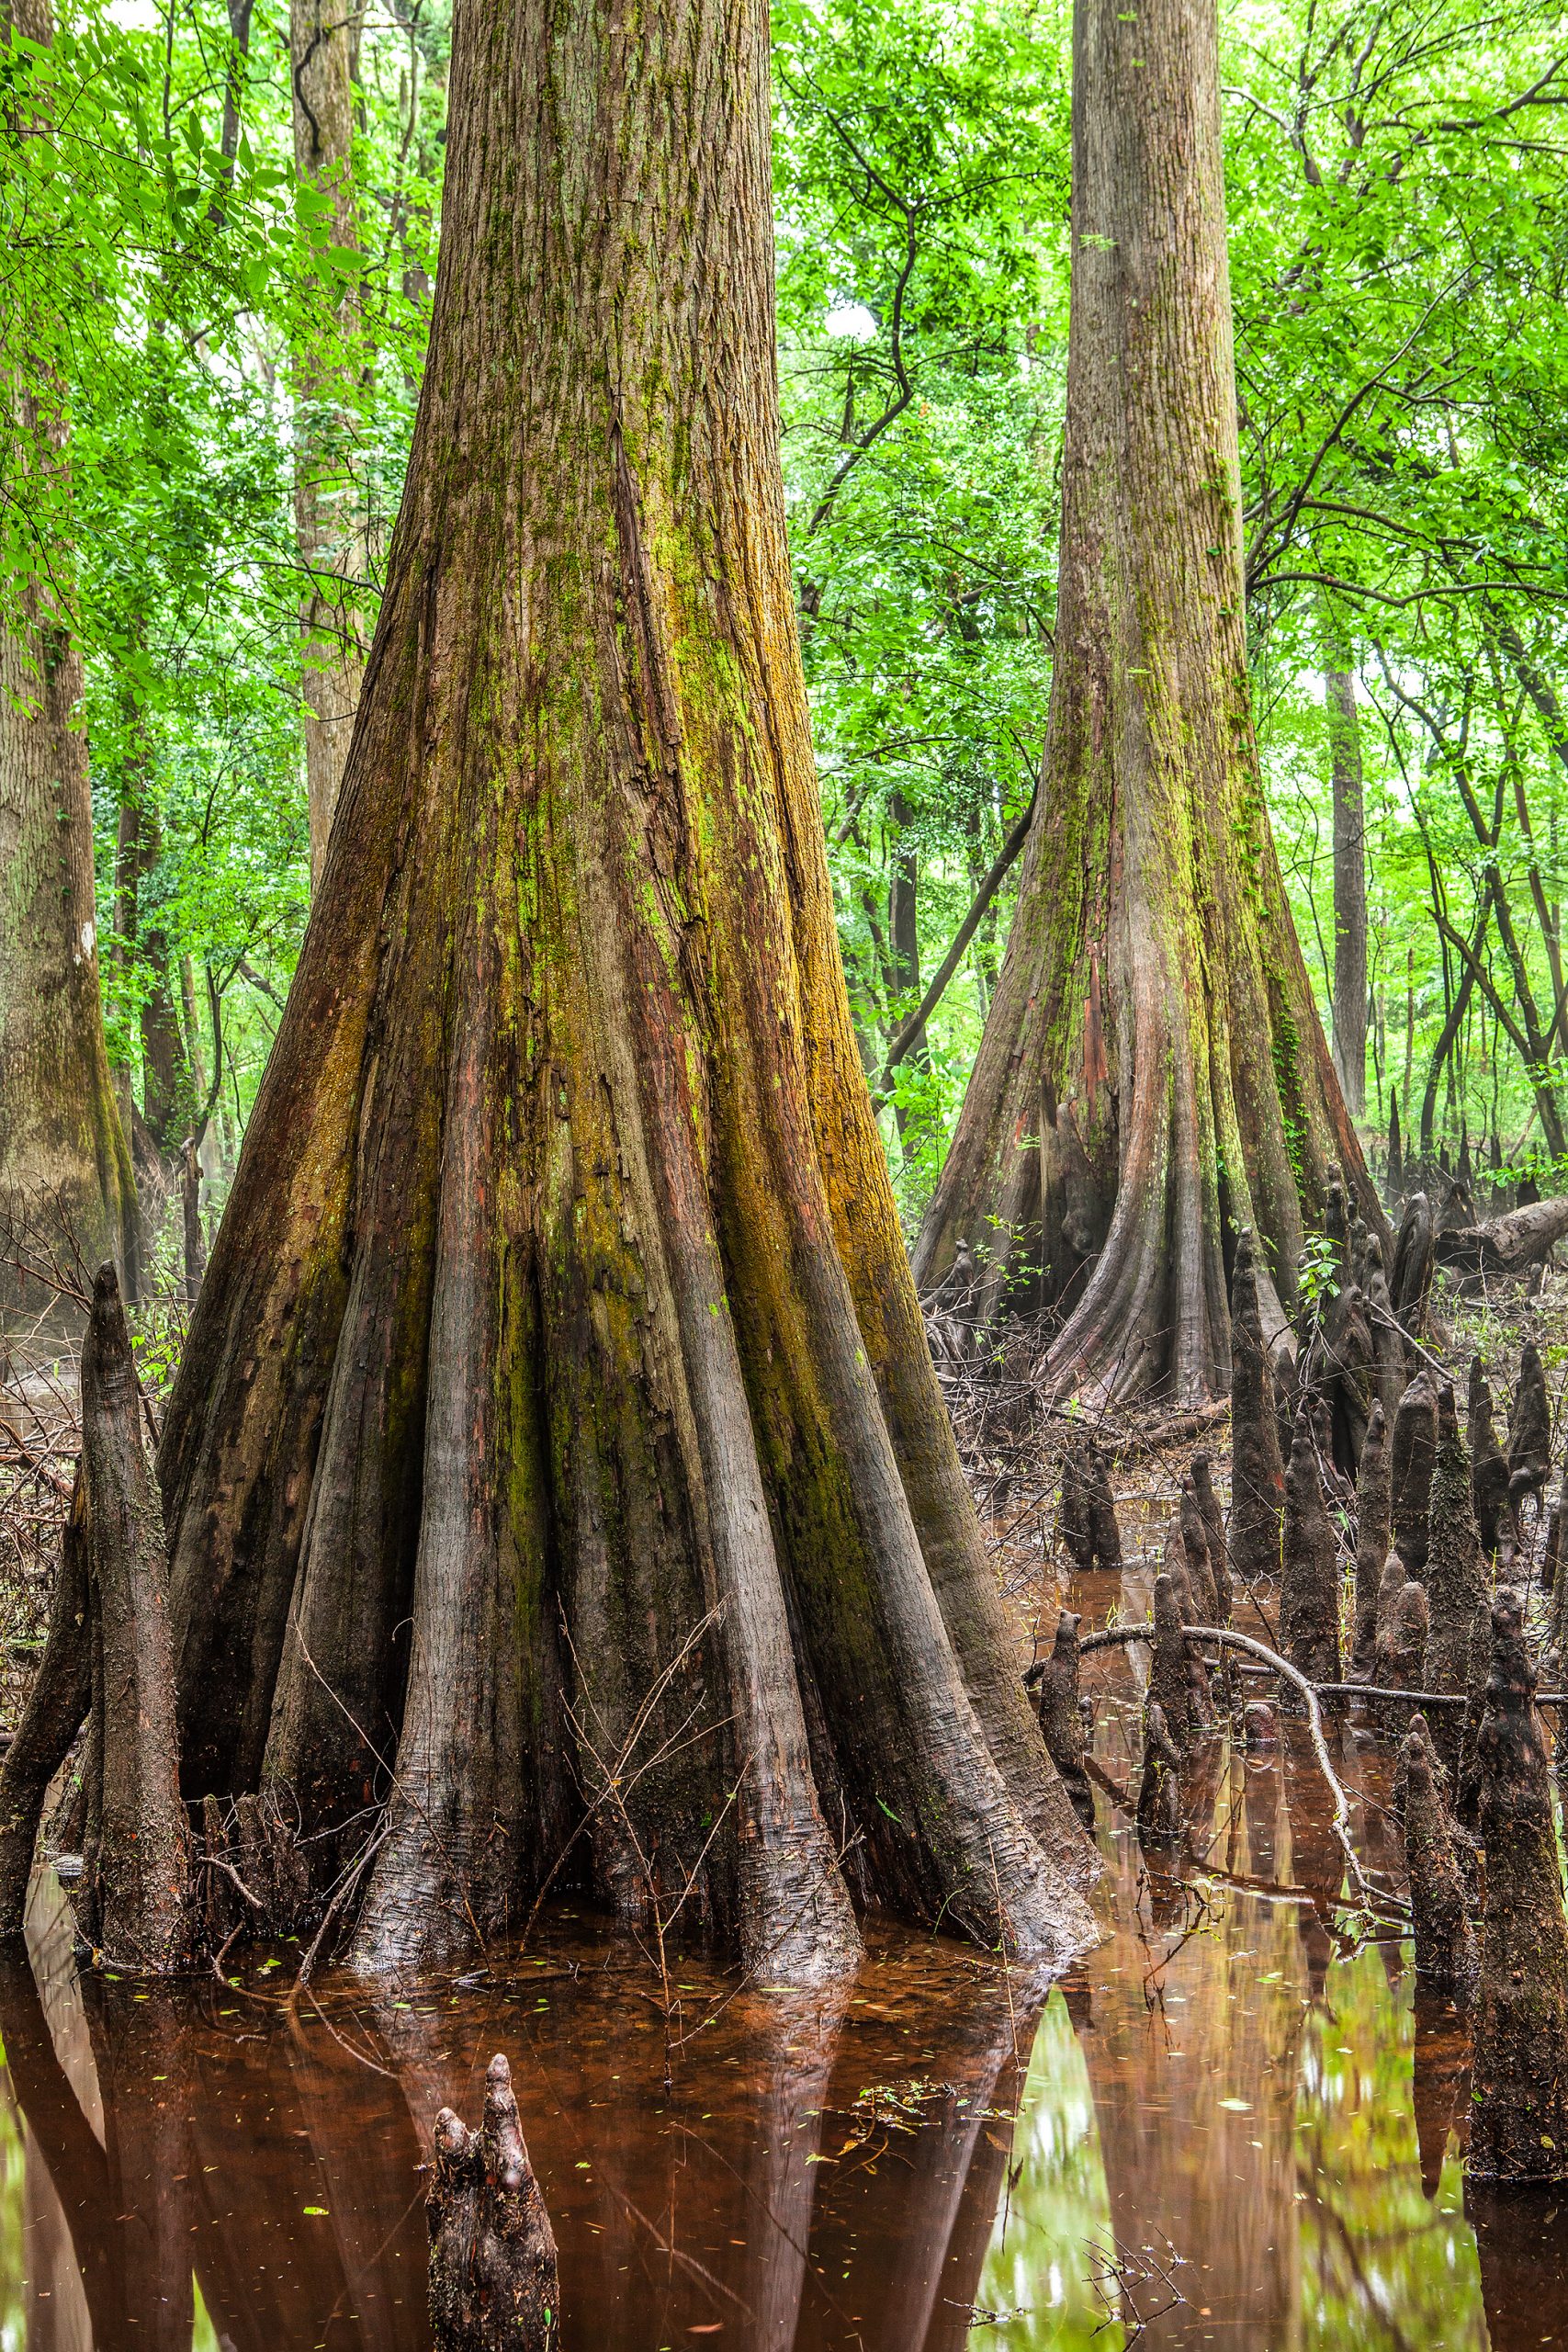 Currently, more than 80 percent of the Congaree National Park is dedicated to wilderness. This adds a layer of protection to the land and ensures no roads or motorized vehicles pass through the area. 
